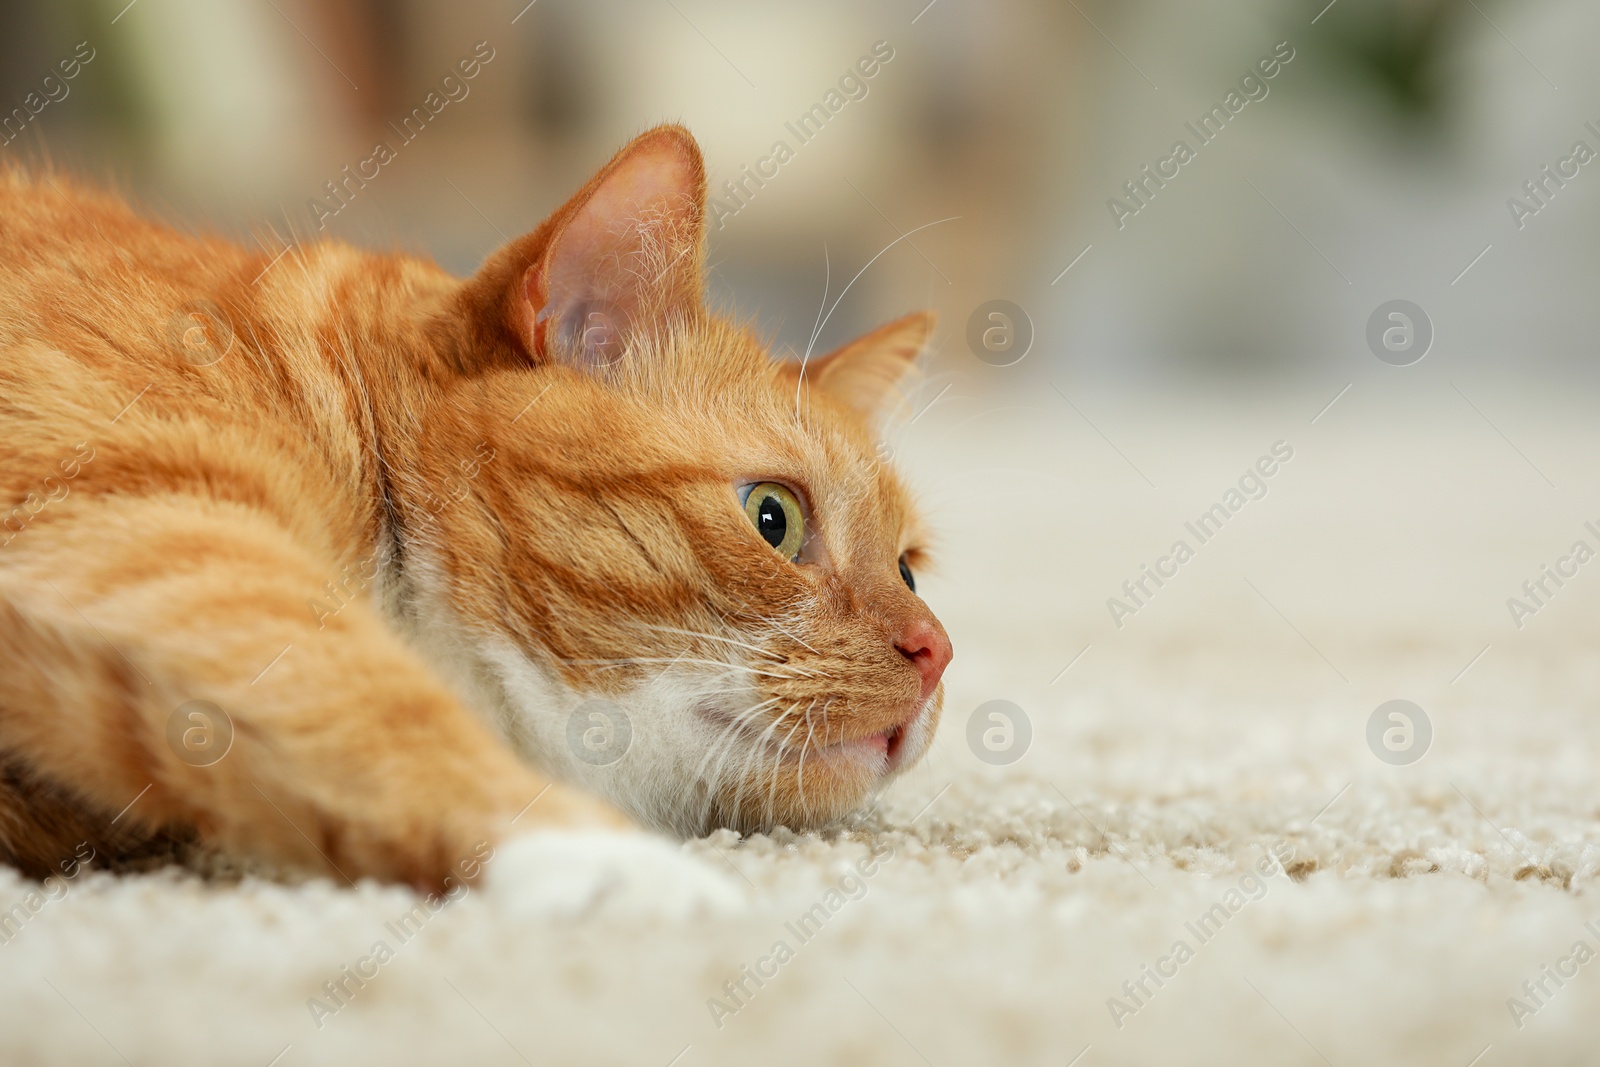 Photo of Cute ginger cat lying on carpet at home, closeup